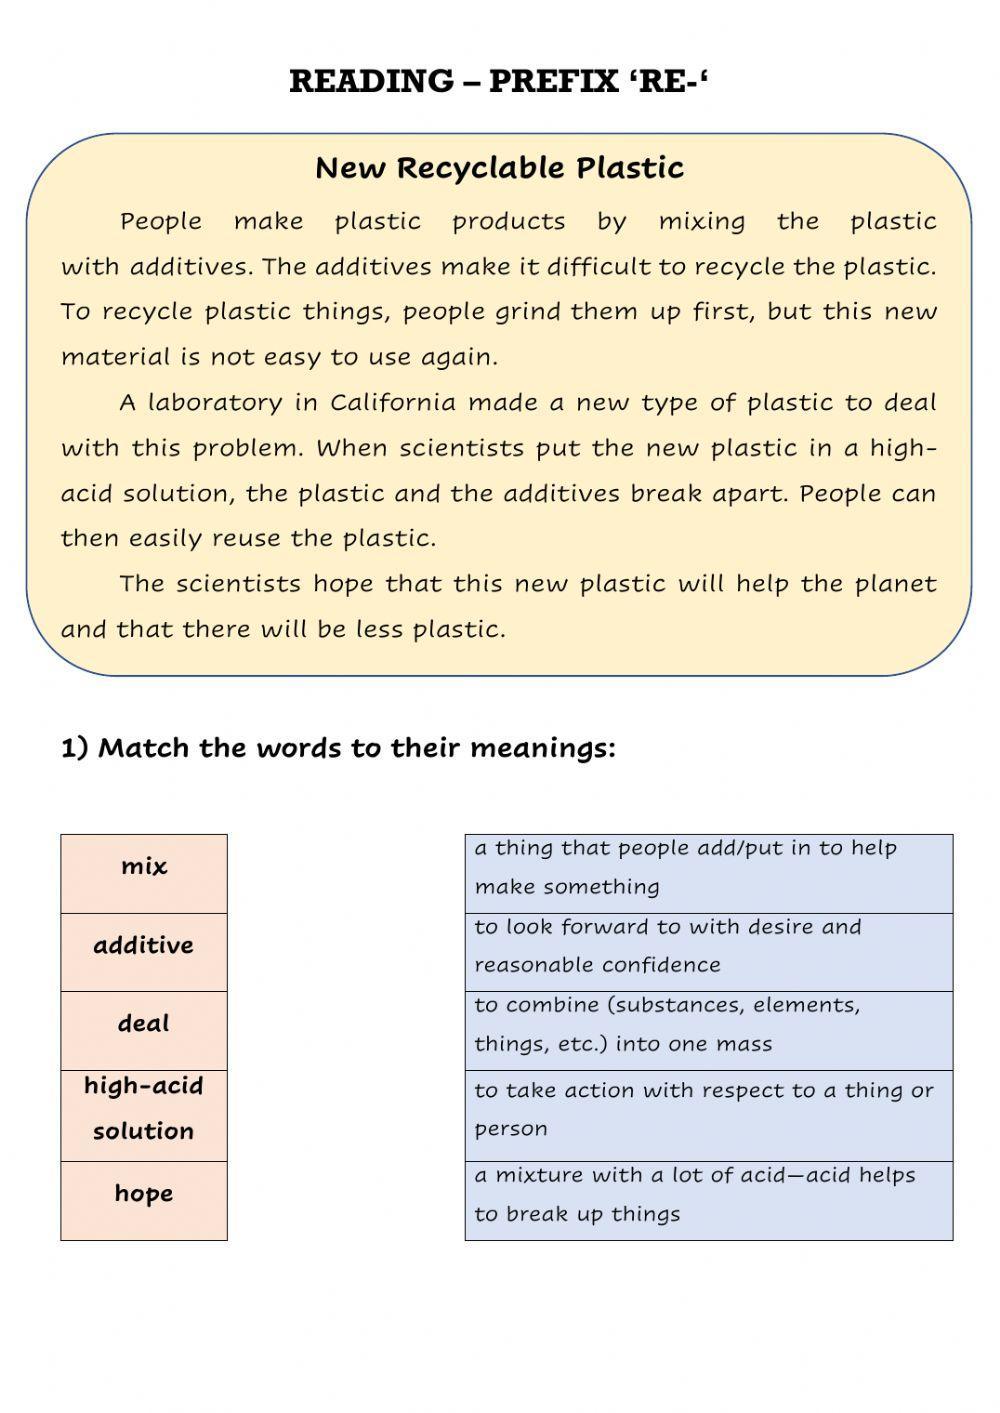 Reading -New Recyclable Plastic